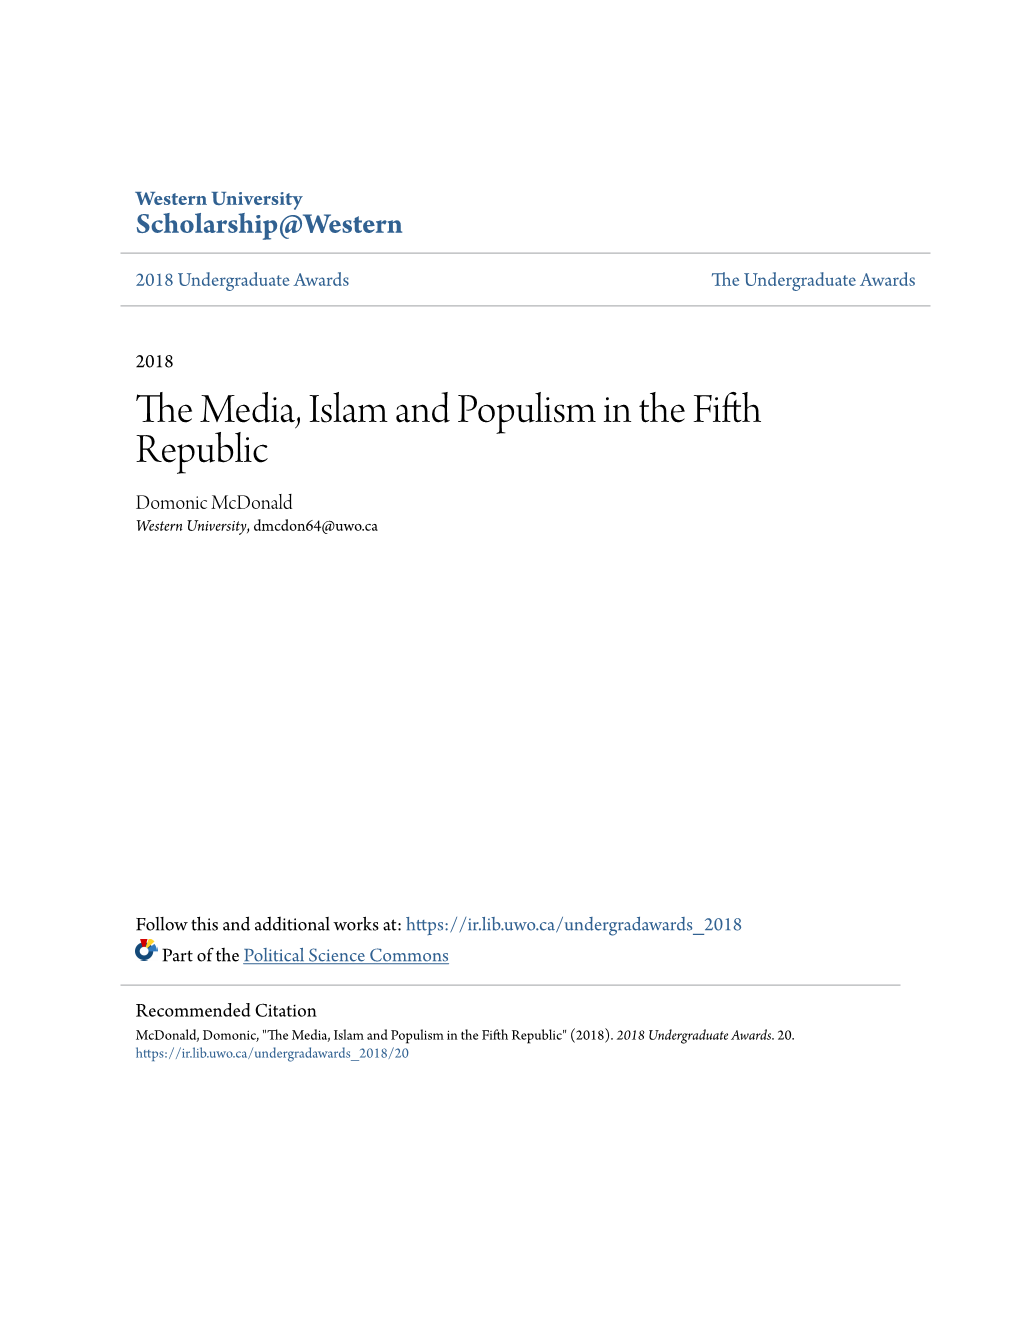 The Media, Islam and Populism in the Fifth Republic